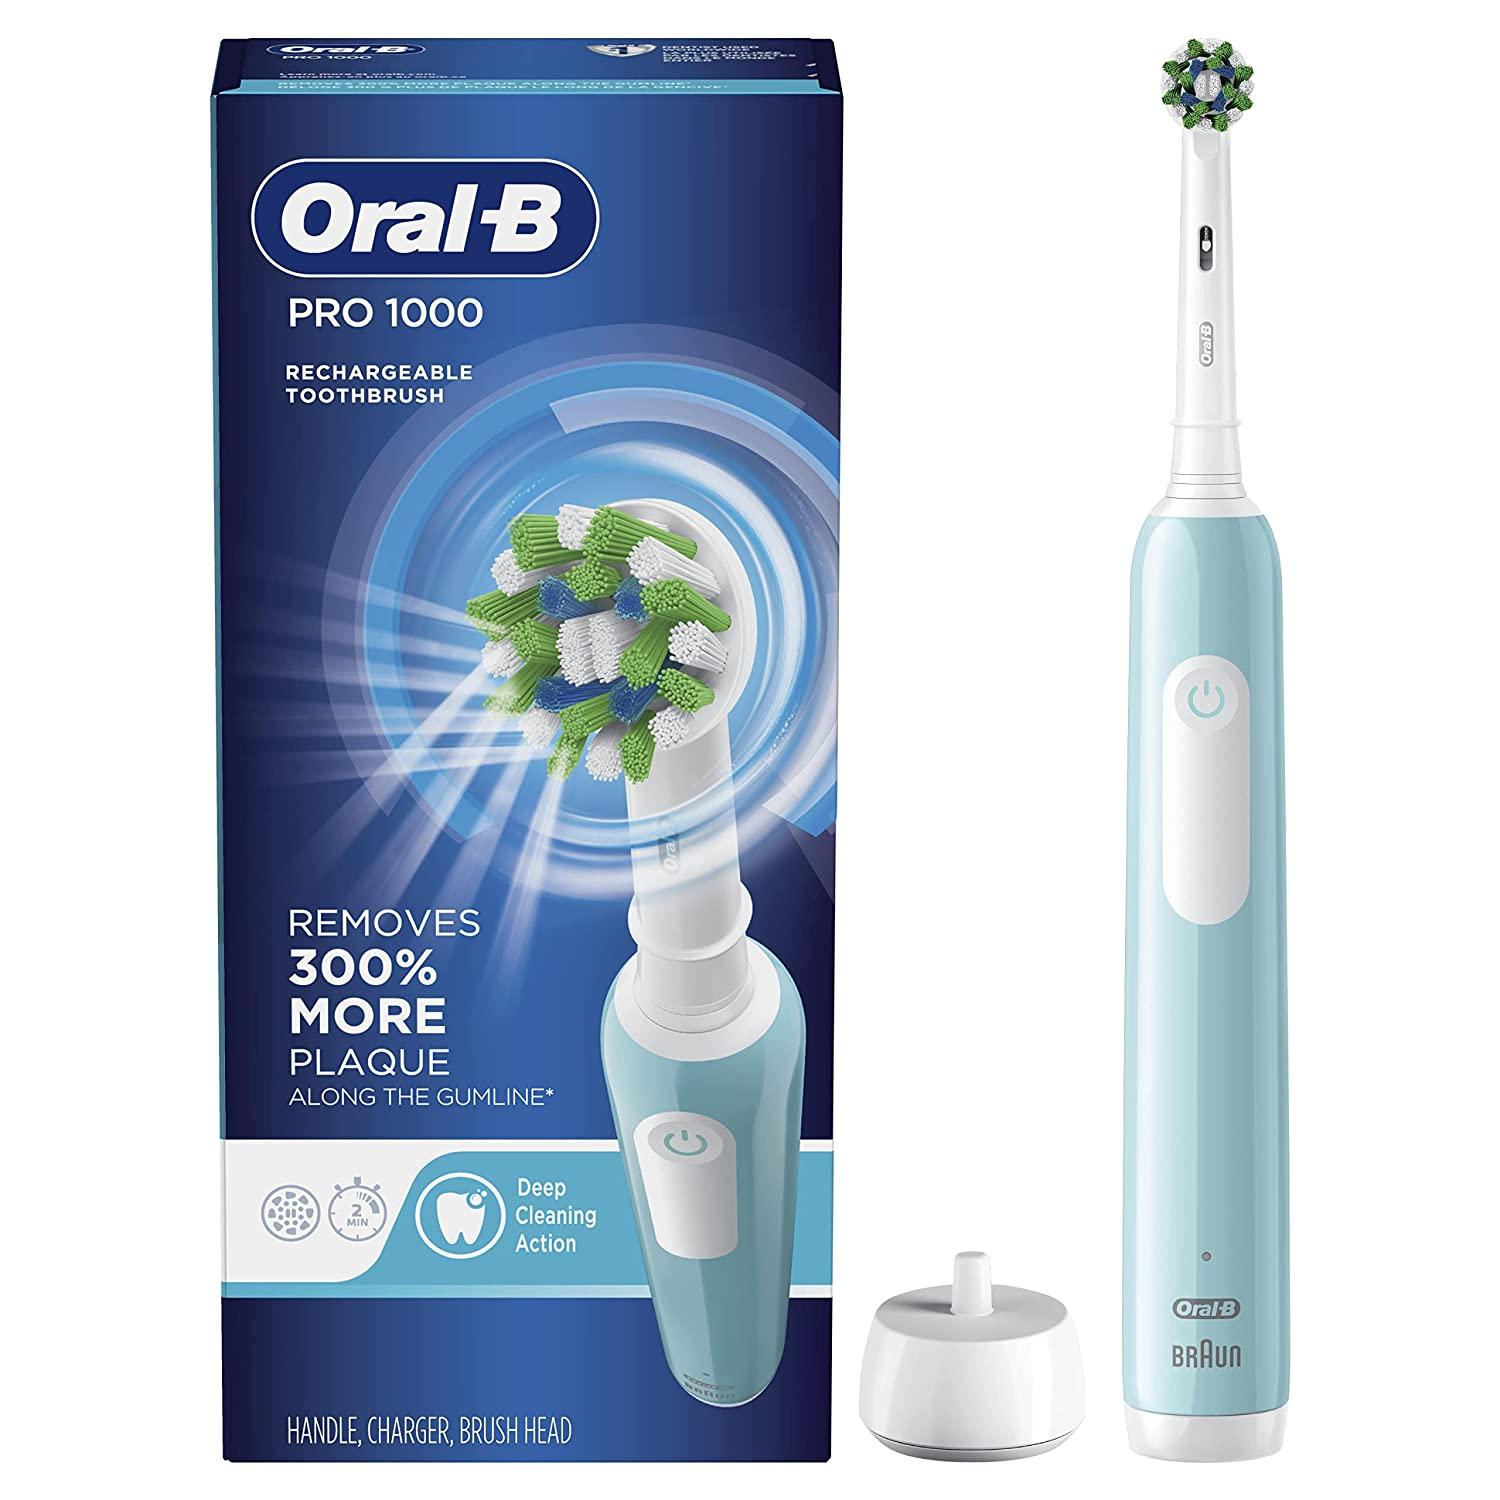 Oral-B Pro 1000 Electric Toothbrush for $29.97 Shipped